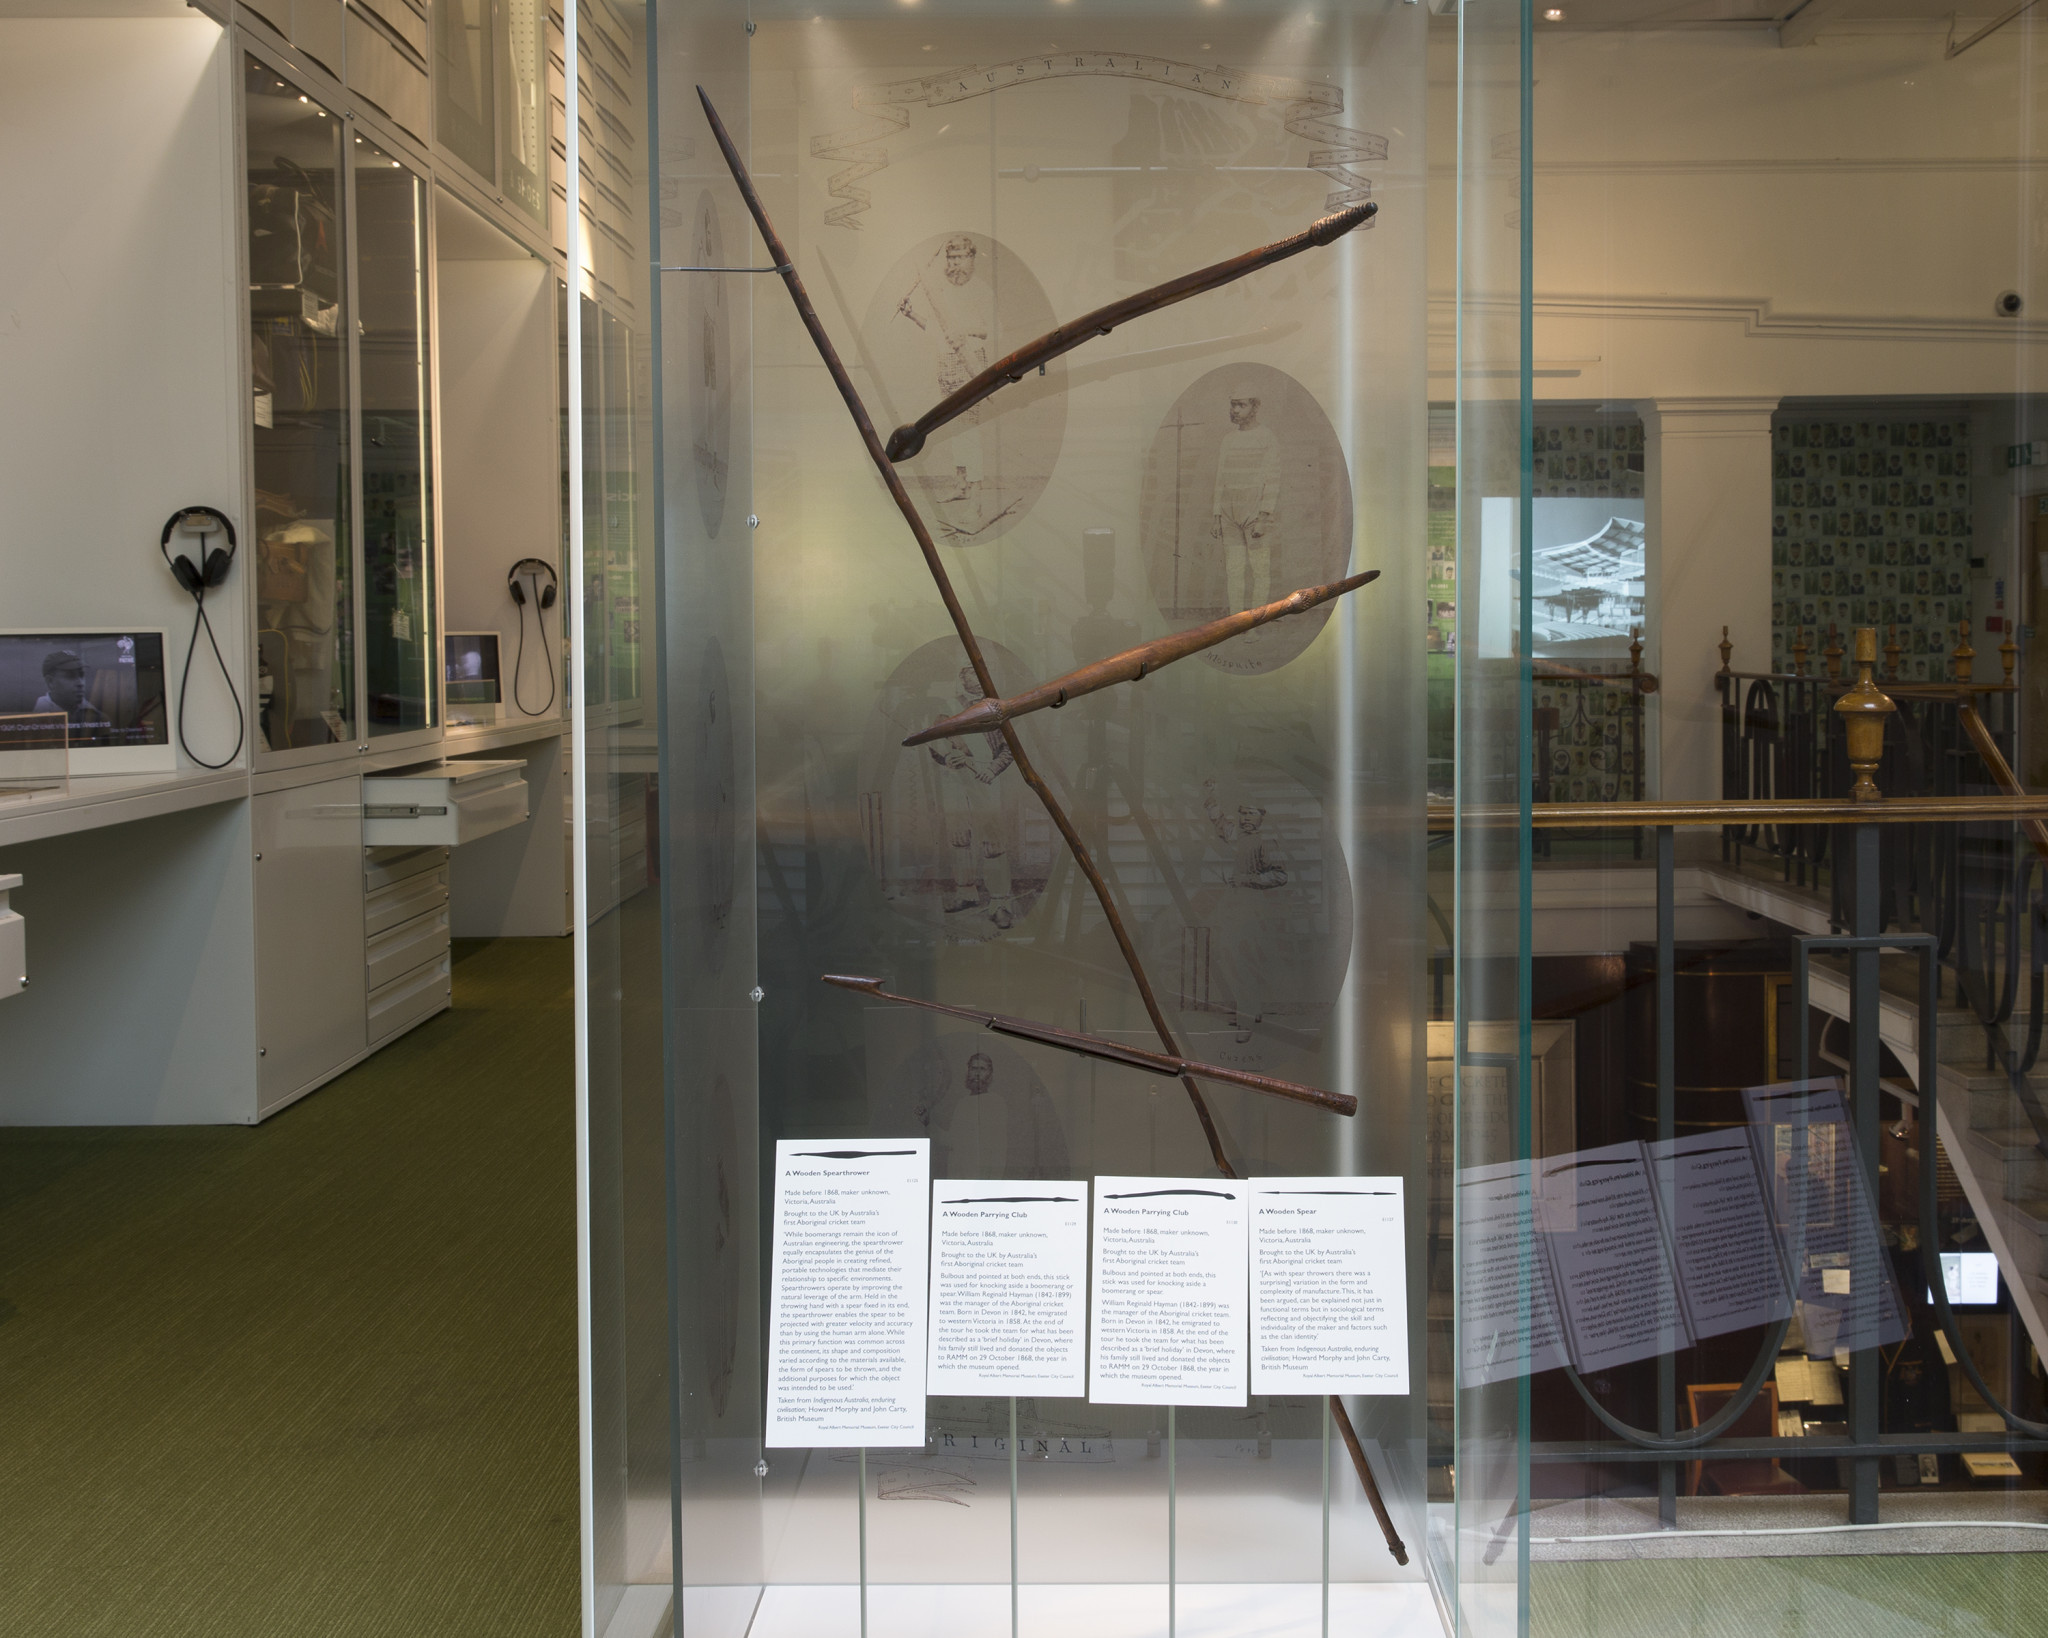 The Aboriginal tour to England in 1868 has been marked by a special exhibition at Lord's cricket ground ©MCC